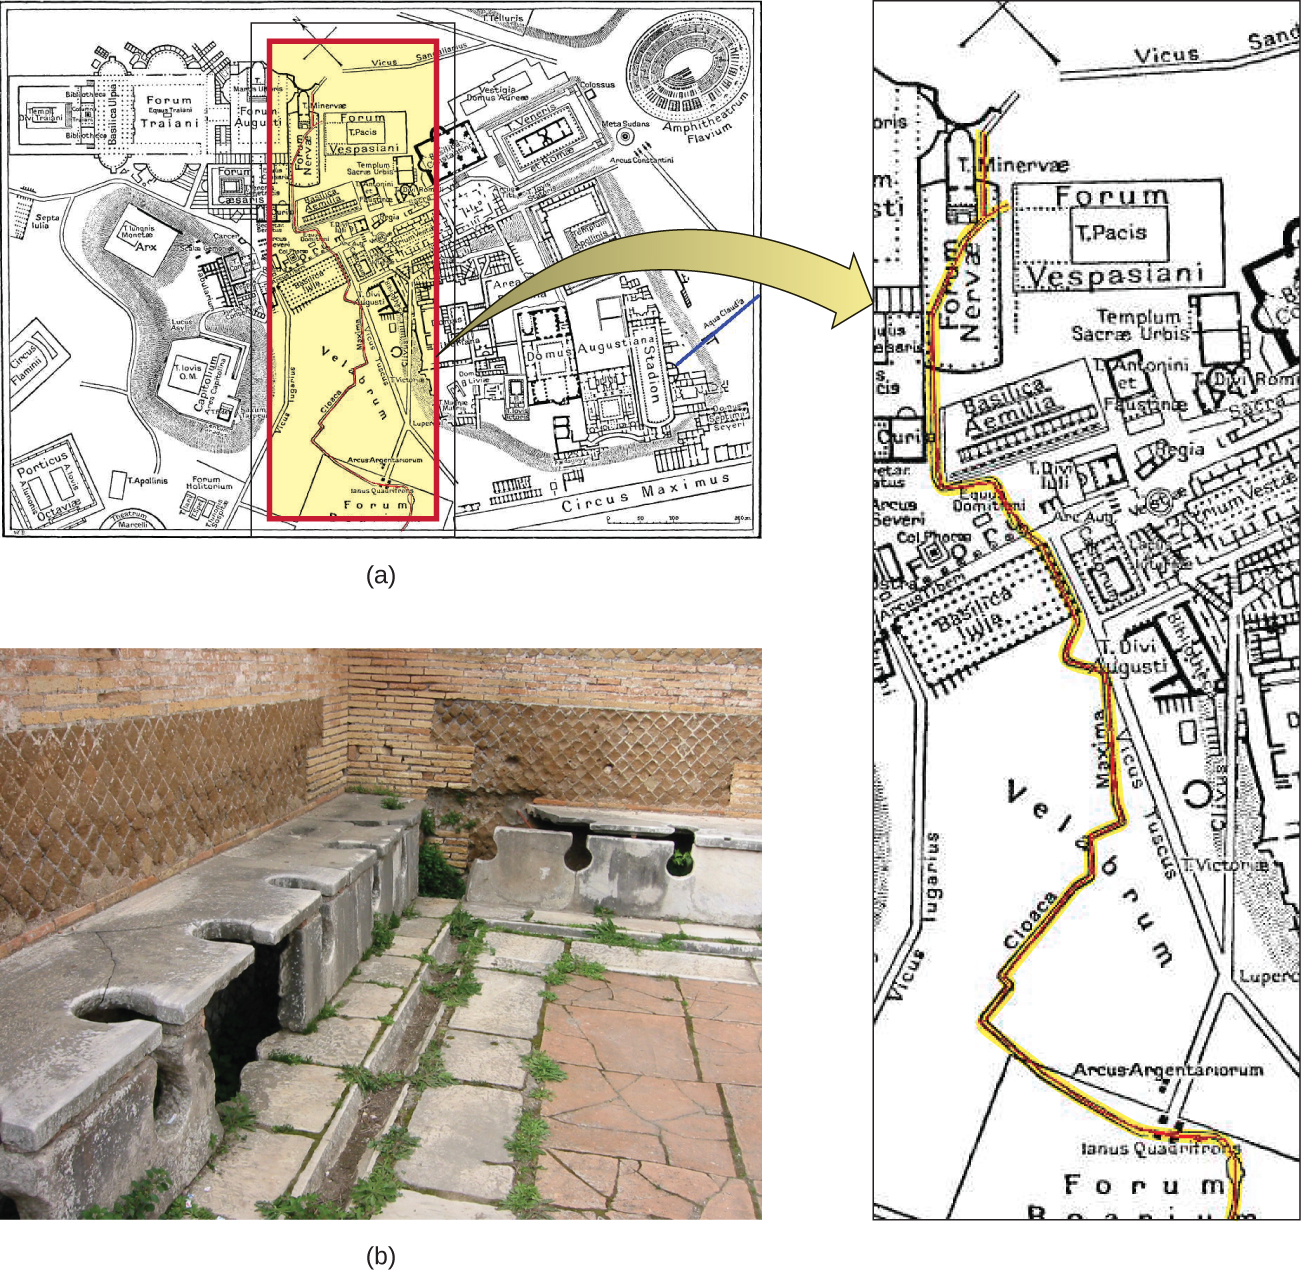 A map of roman, a view of the map zoomed in to show the sewage line, and a still shot of the latrines that were empties into the Cloaca Maxima